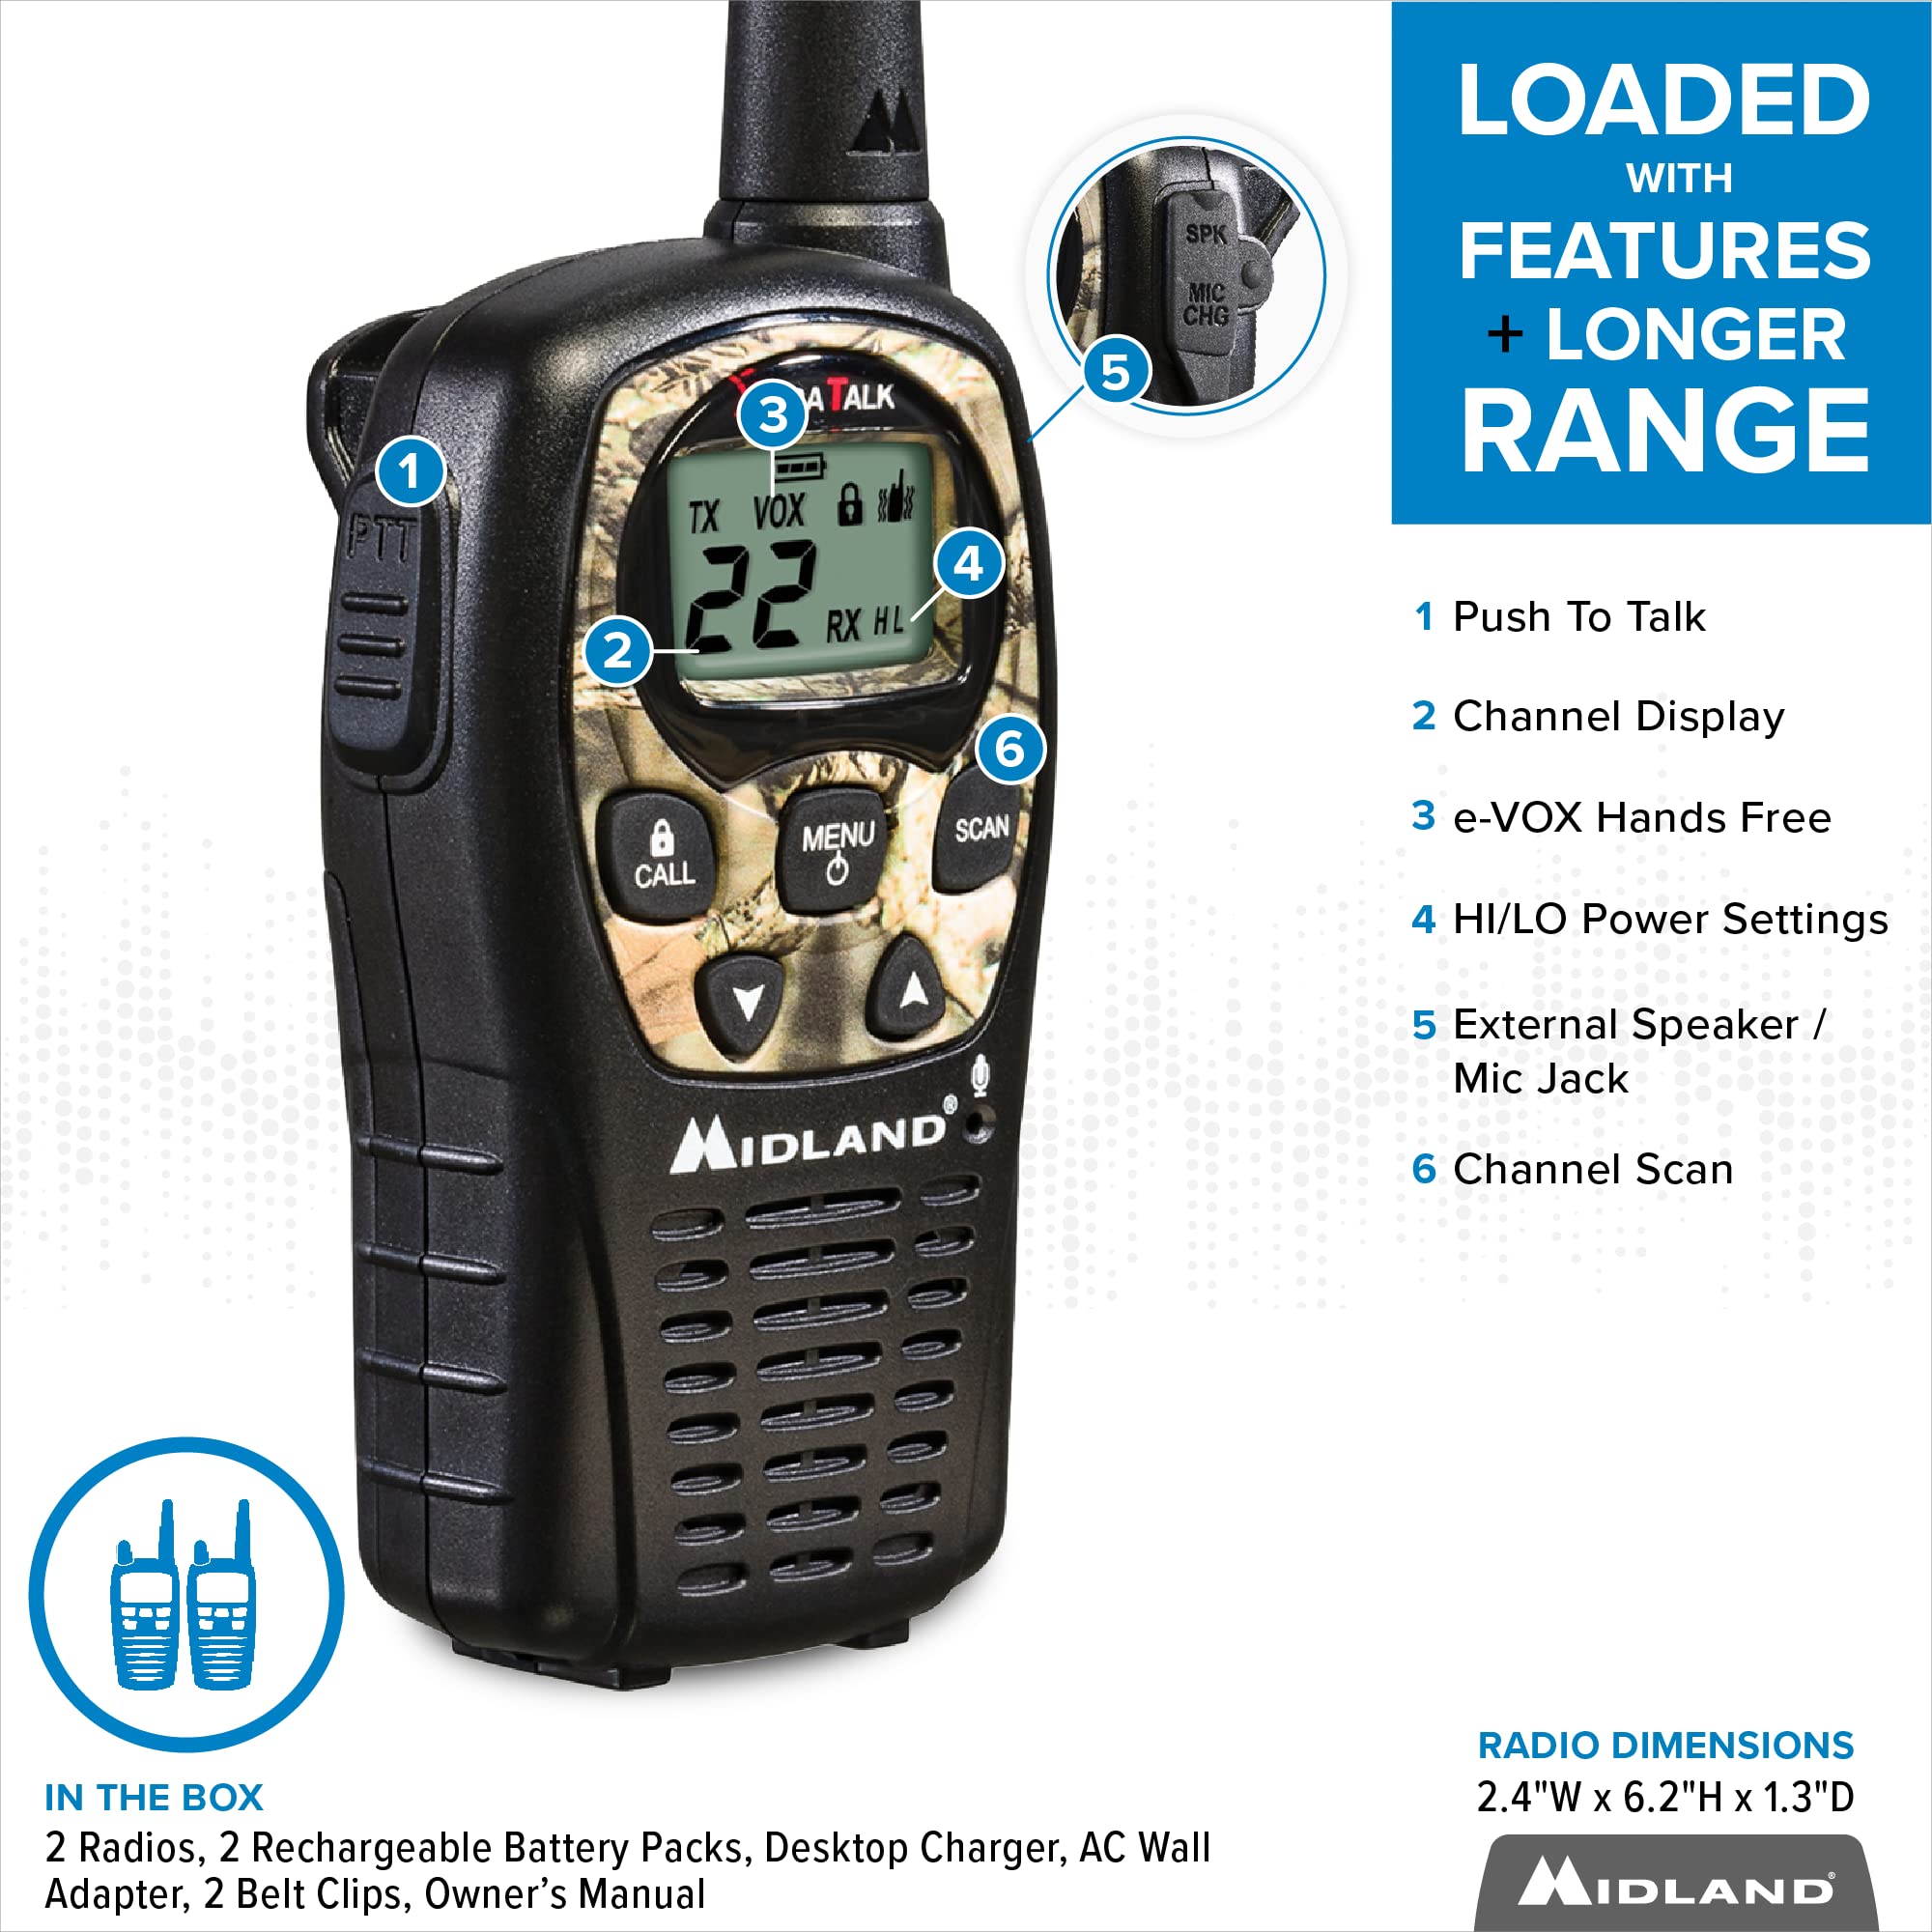 Midland 22 Channel FRS Walkie Talkies with Channel Scan - Long Range Two Way Radios, Silent Operation, Batteries Included (Mossy Oak Camo, 2-Pack)